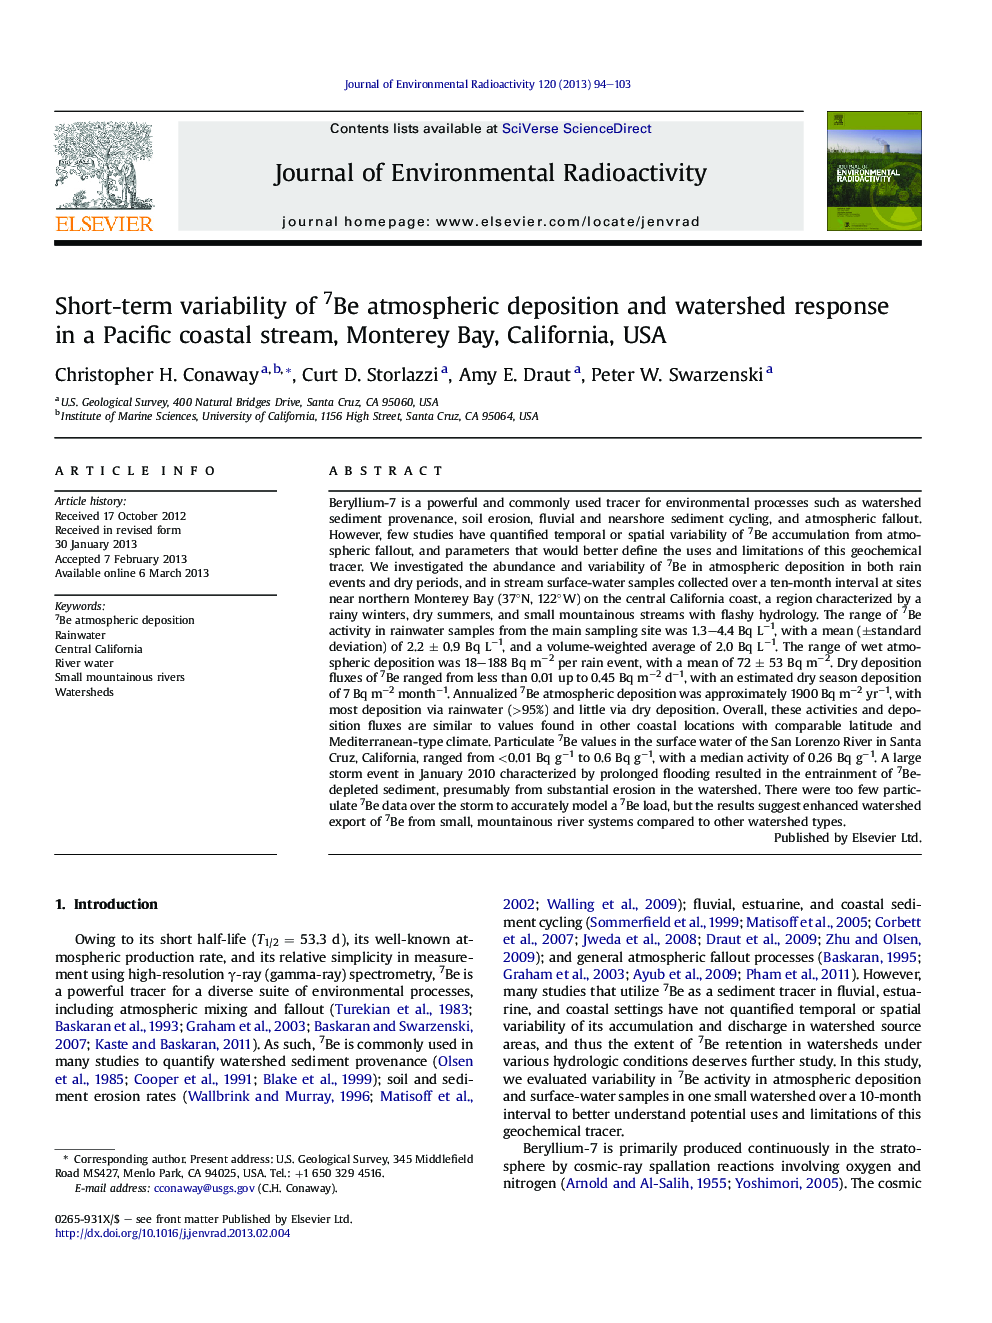 Short-term variability of 7Be atmospheric deposition and watershed response in a Pacific coastal stream, Monterey Bay, California, USA